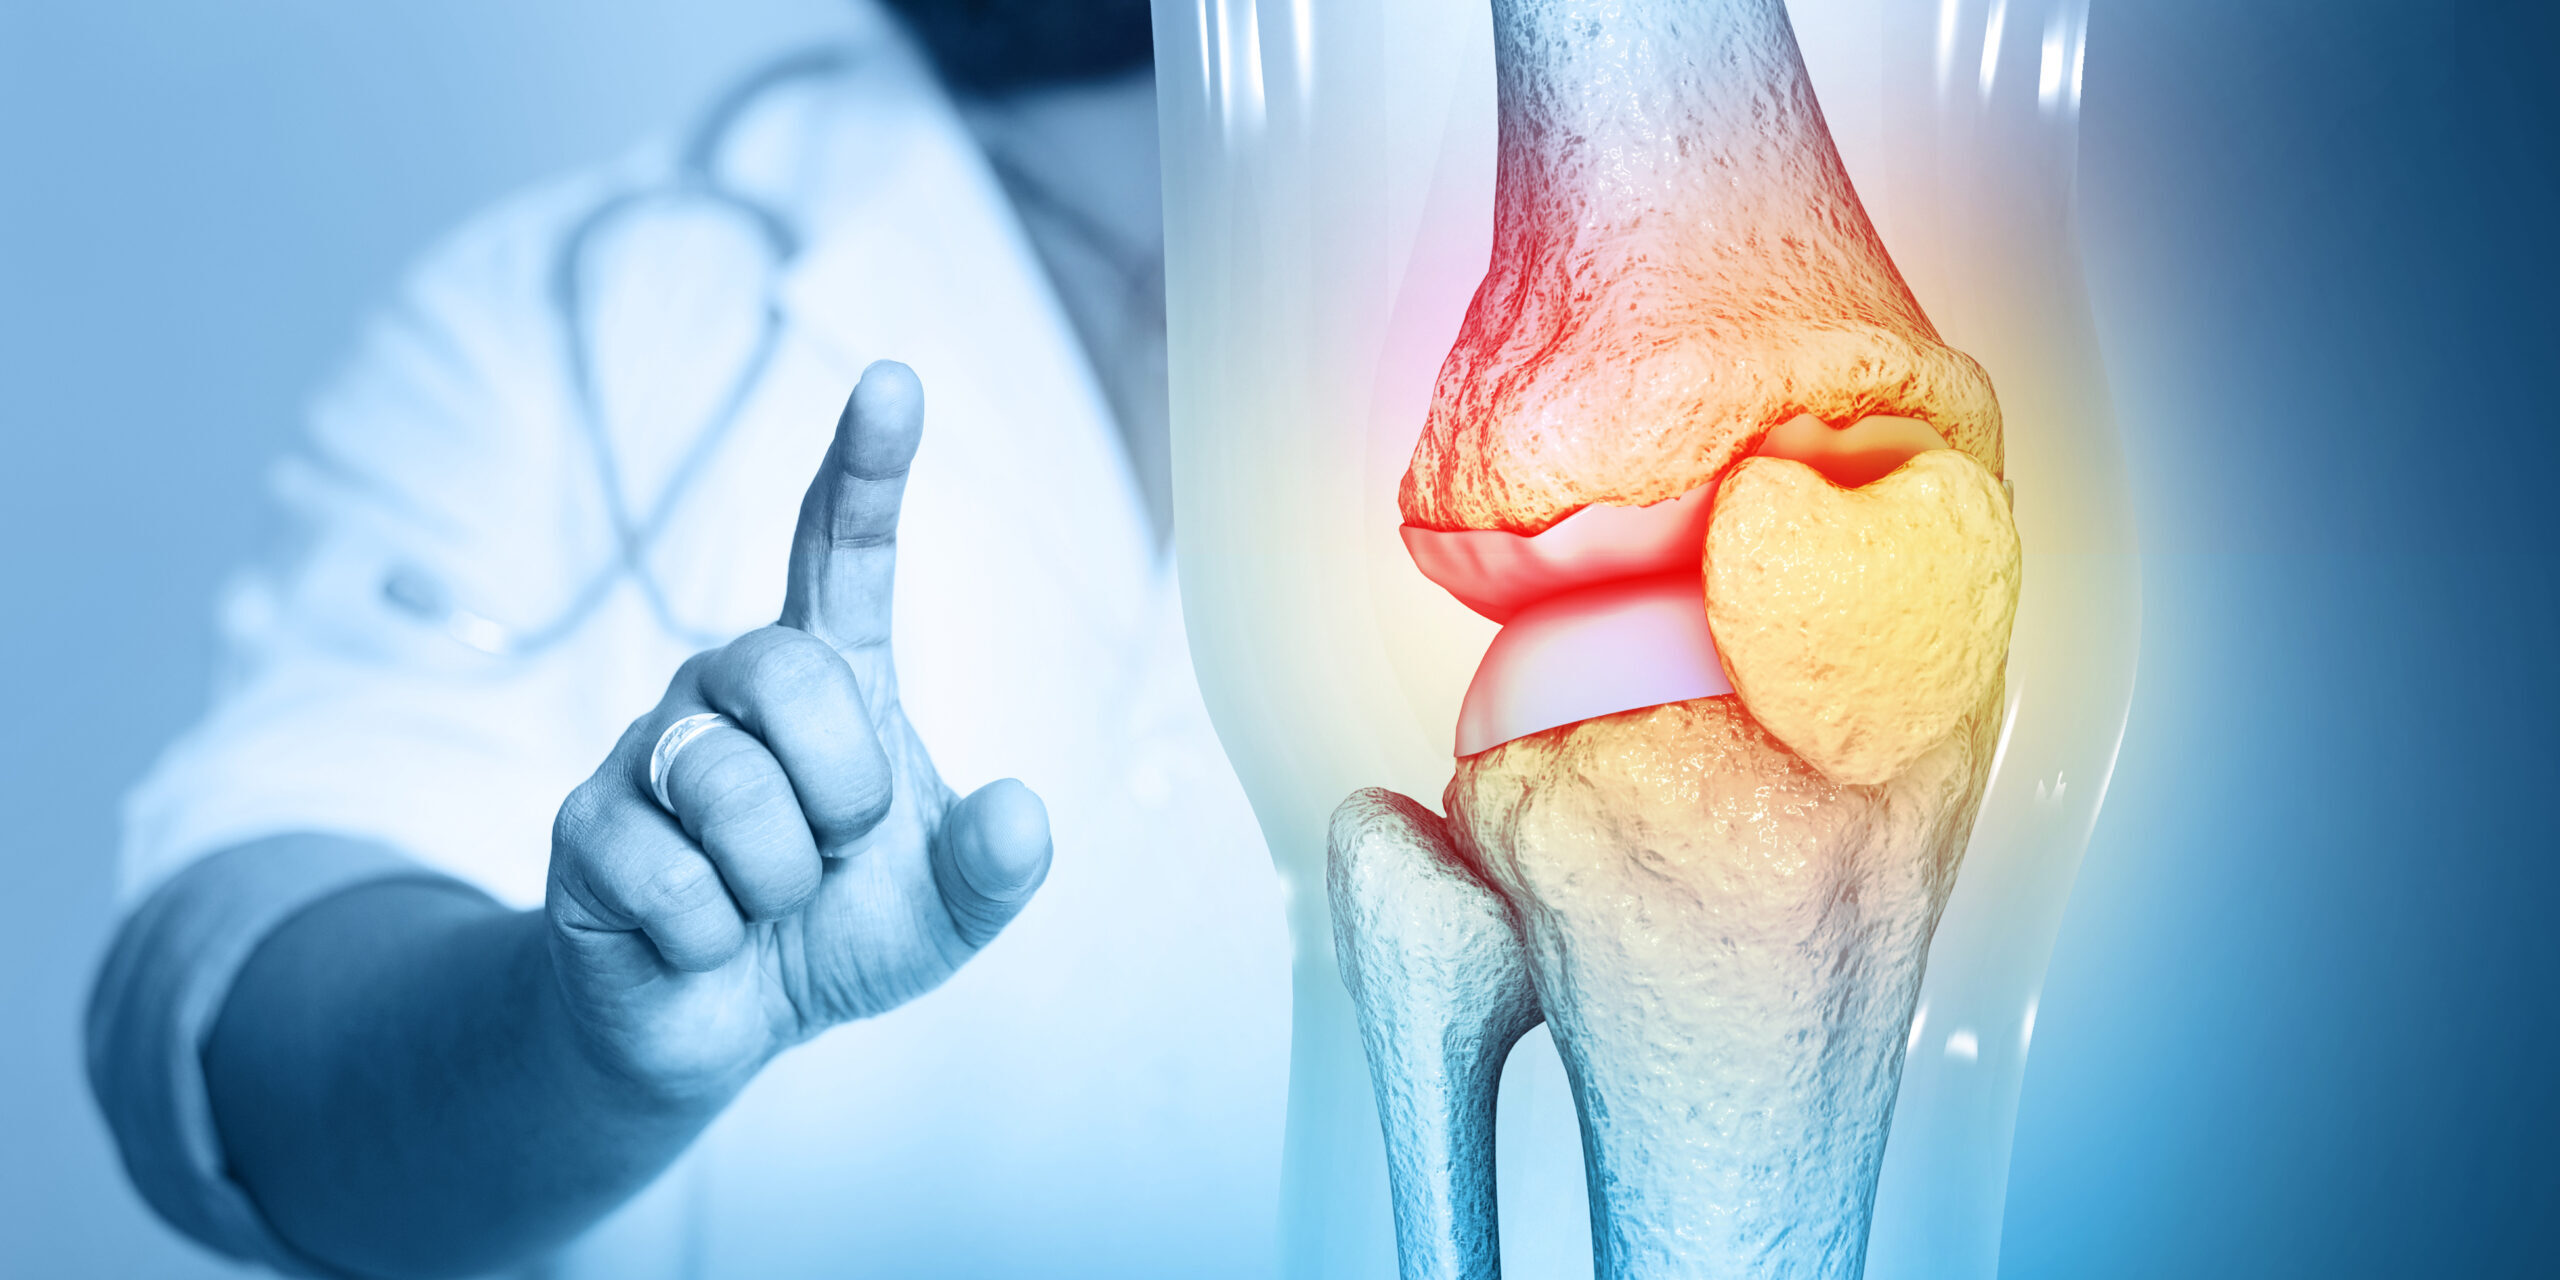 Doctor check and diagnose the Pain in knee joint on medical background. 3d illustration